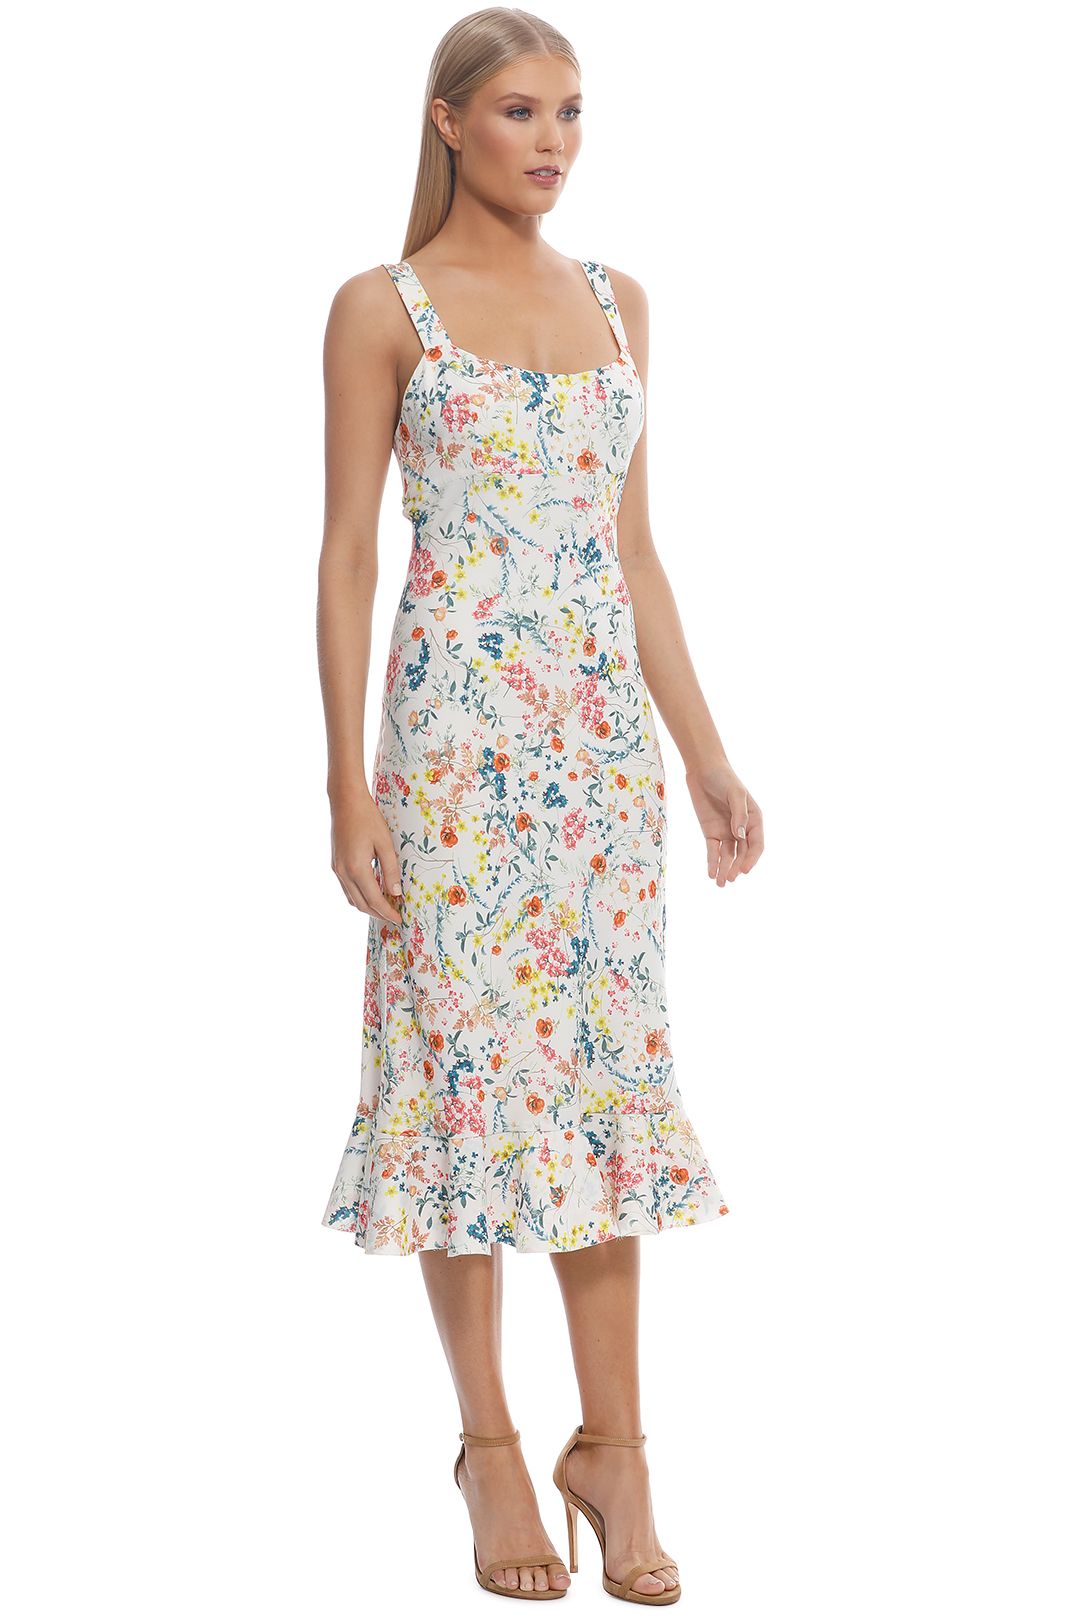 By Johnny - Ditsy Frill Bias Midi Dress - Ivory Floral - Side